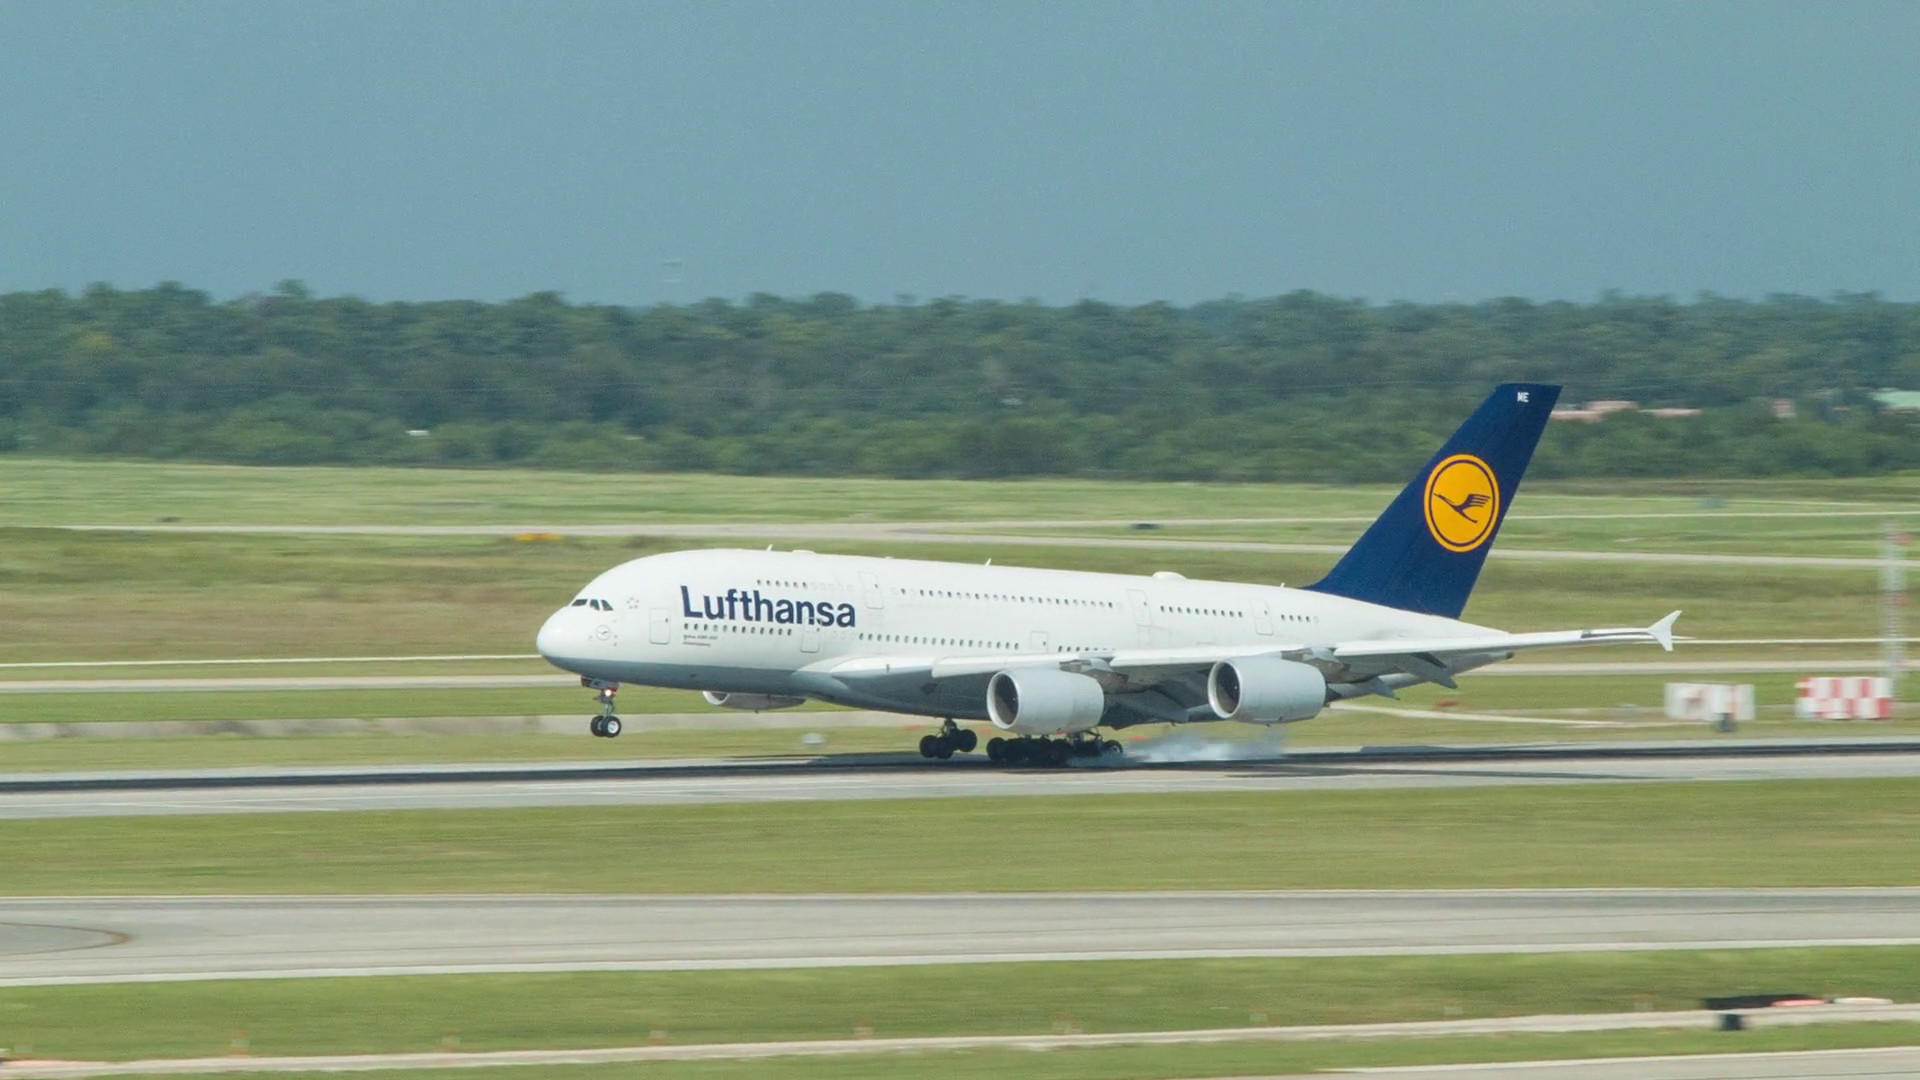 1920x1080 Lufthansa Airbus A380-841 named Johannesburg Landing at George Bush  Intercontinental Airport IAH in Houston TX from Non-stop from Frankfurt  Germany on a ...